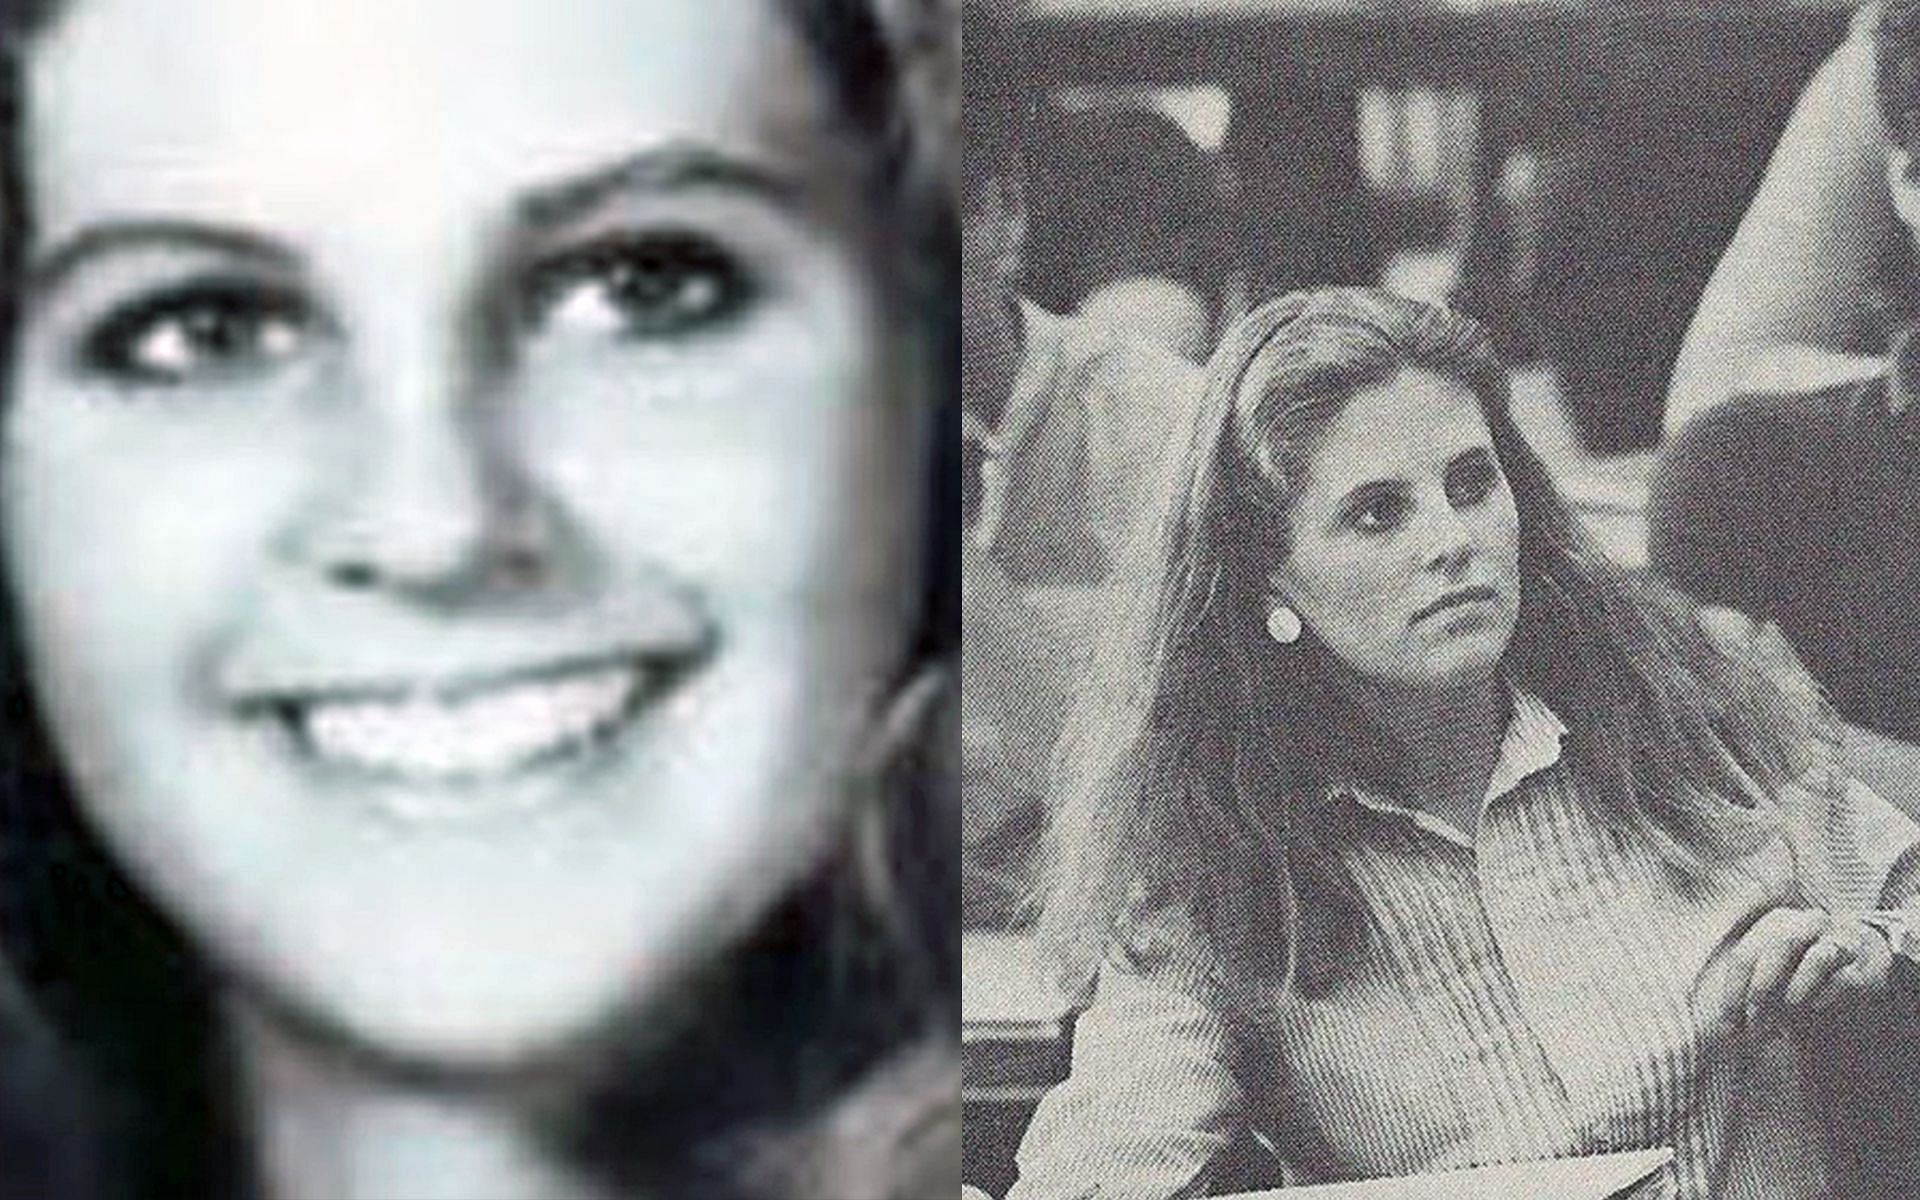 Angela Samota&#039;s brutal murder in 1984 will be the subject of Murdered by Morning&#039;s upcoming episode (Images via BBC)